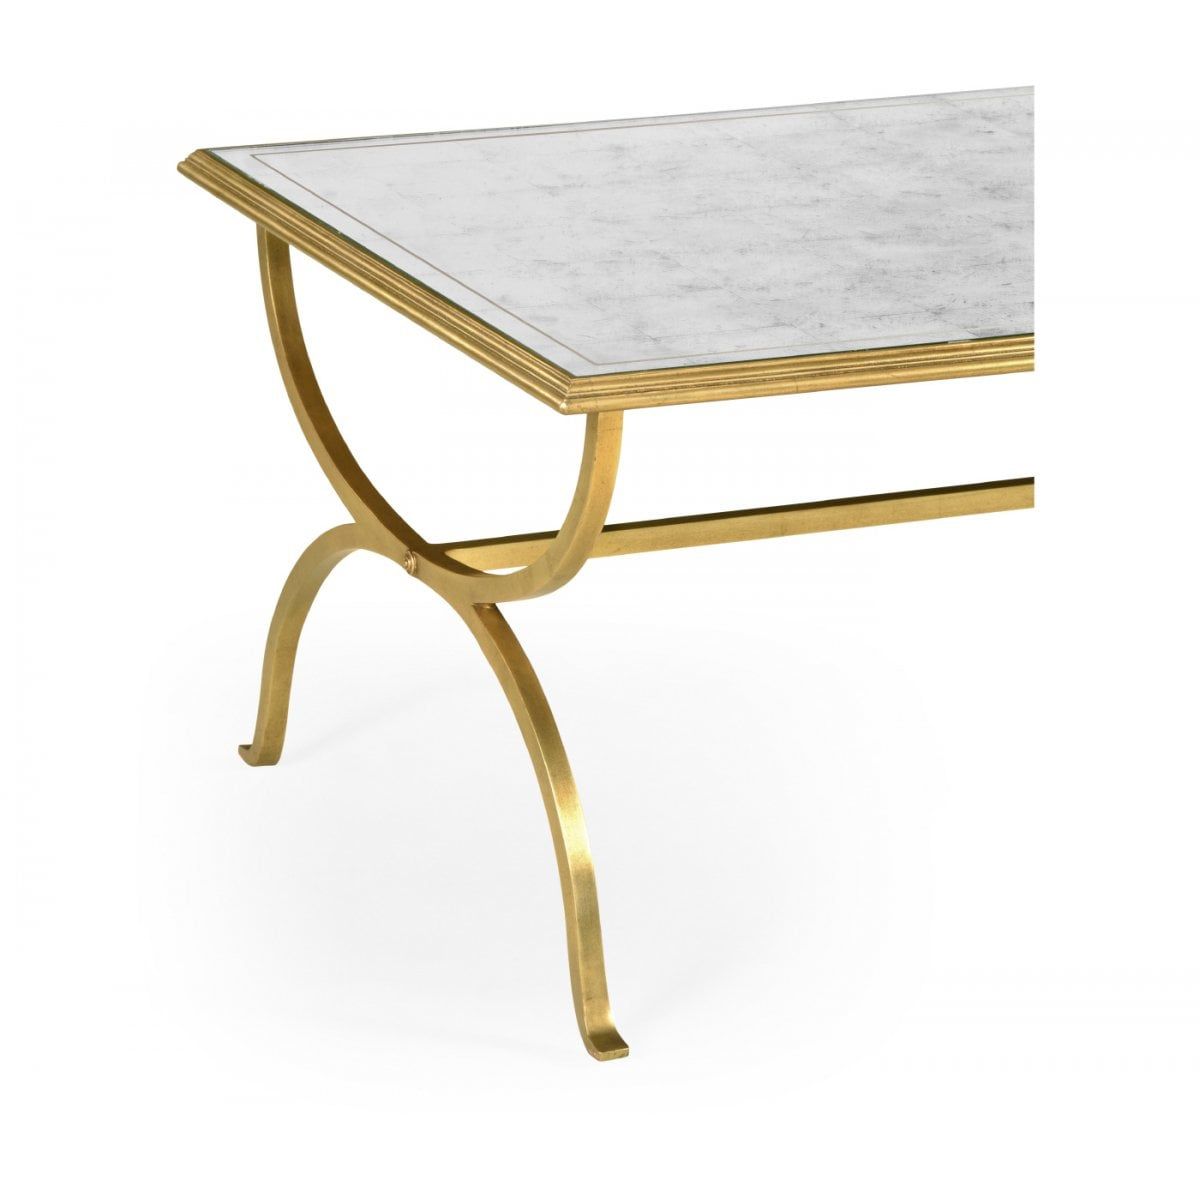 Rectangular Gold Coffee Table With Glass Top | Swanky Throughout Rectangular Glass Top Coffee Tables (Photo 2 of 15)